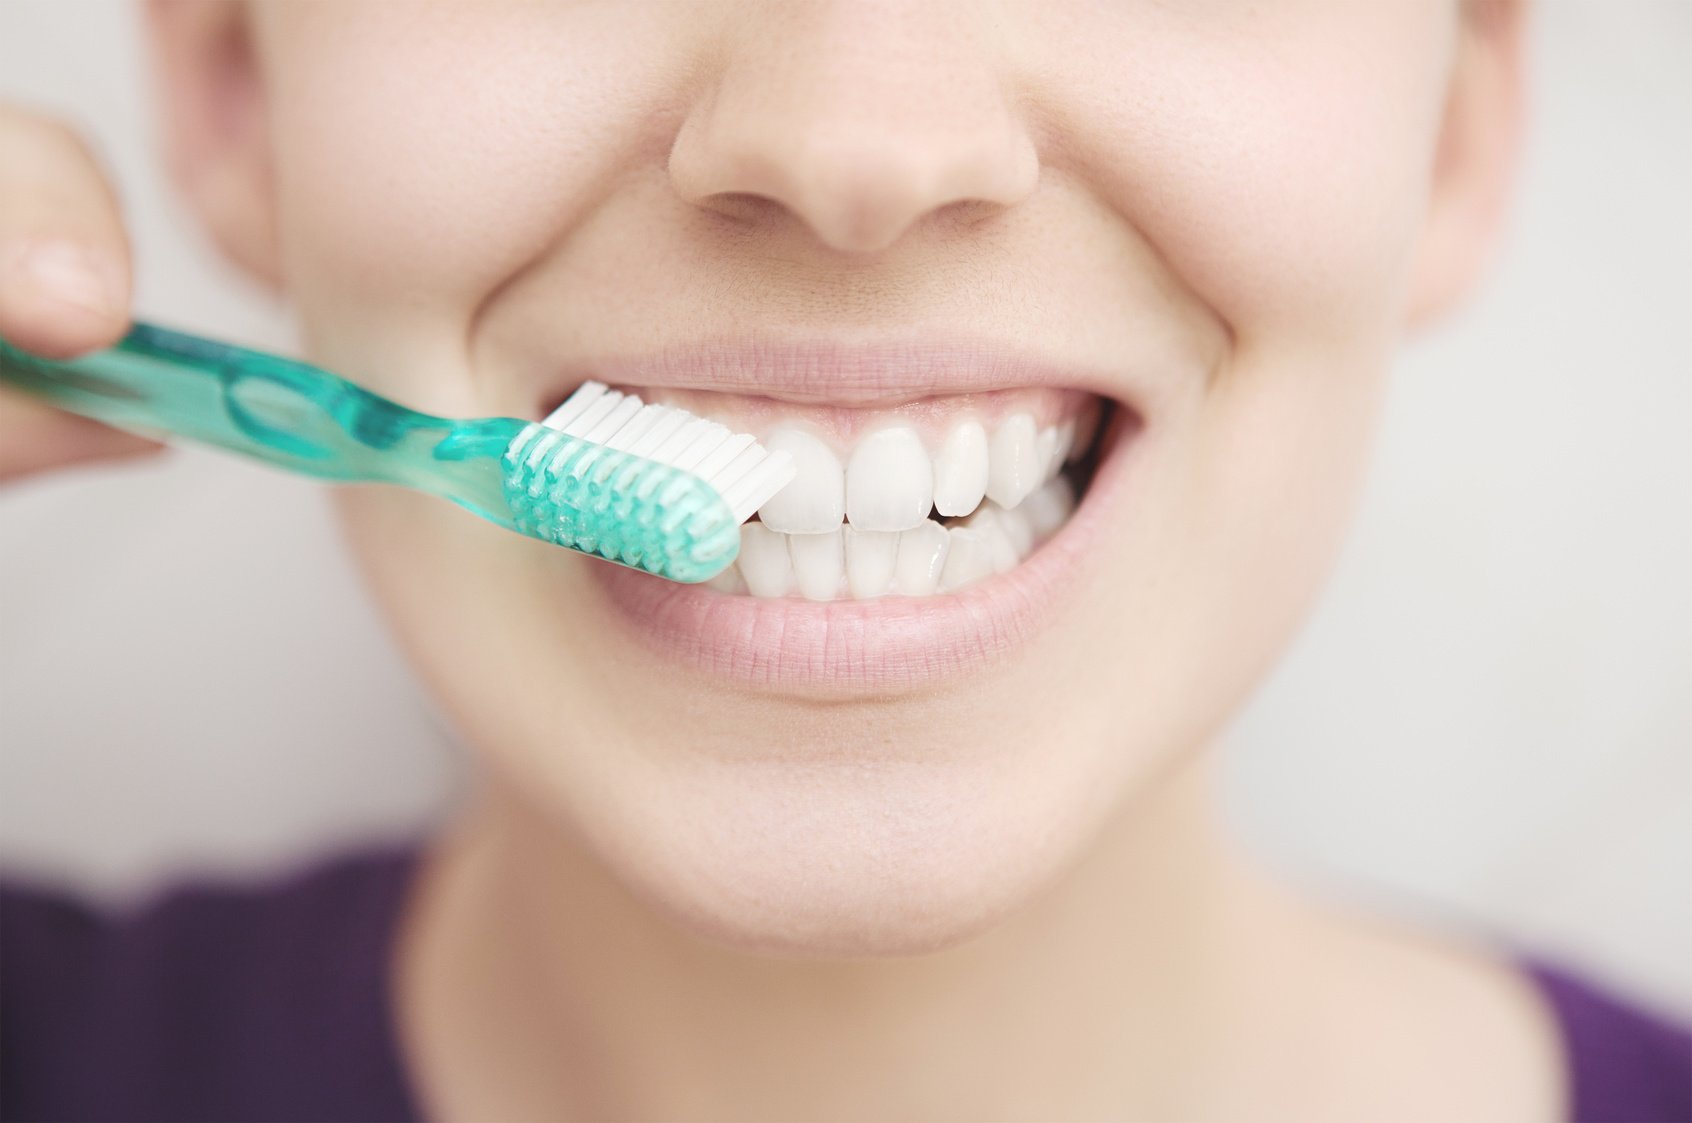 Should you use a soft or hard toothbrush?